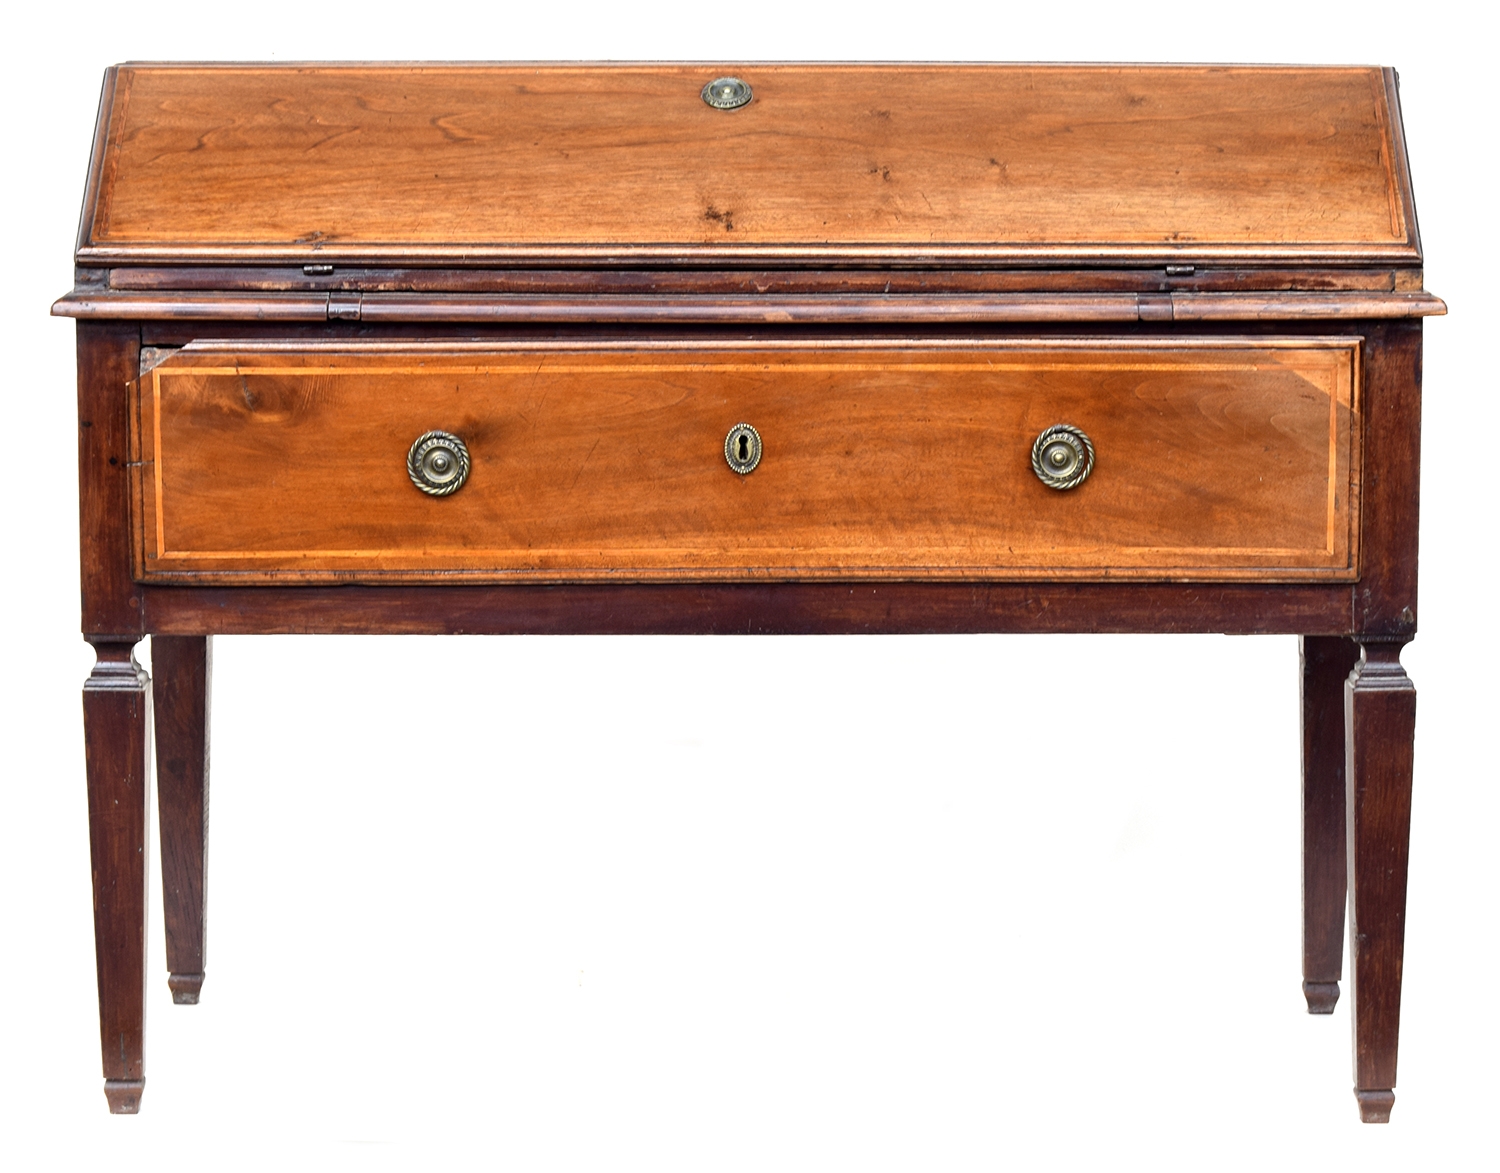 A Regency sideboard bureau, fall front with two drawers above deep single drawer, panelled sides and